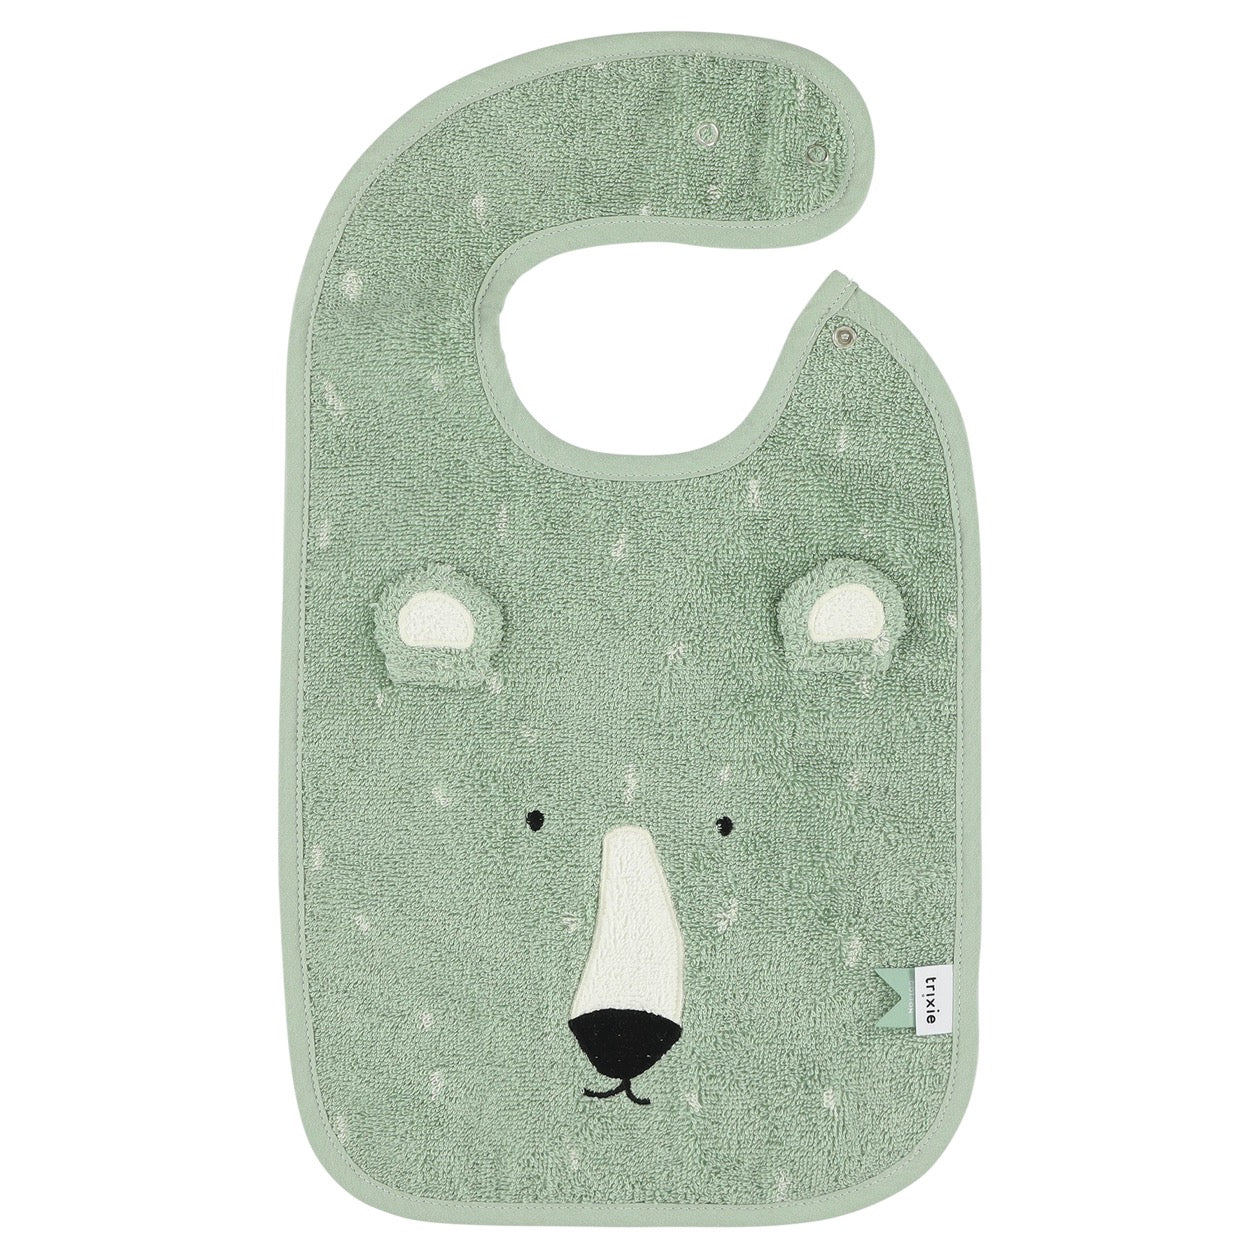 Baby bib in green with polar bear face and ears